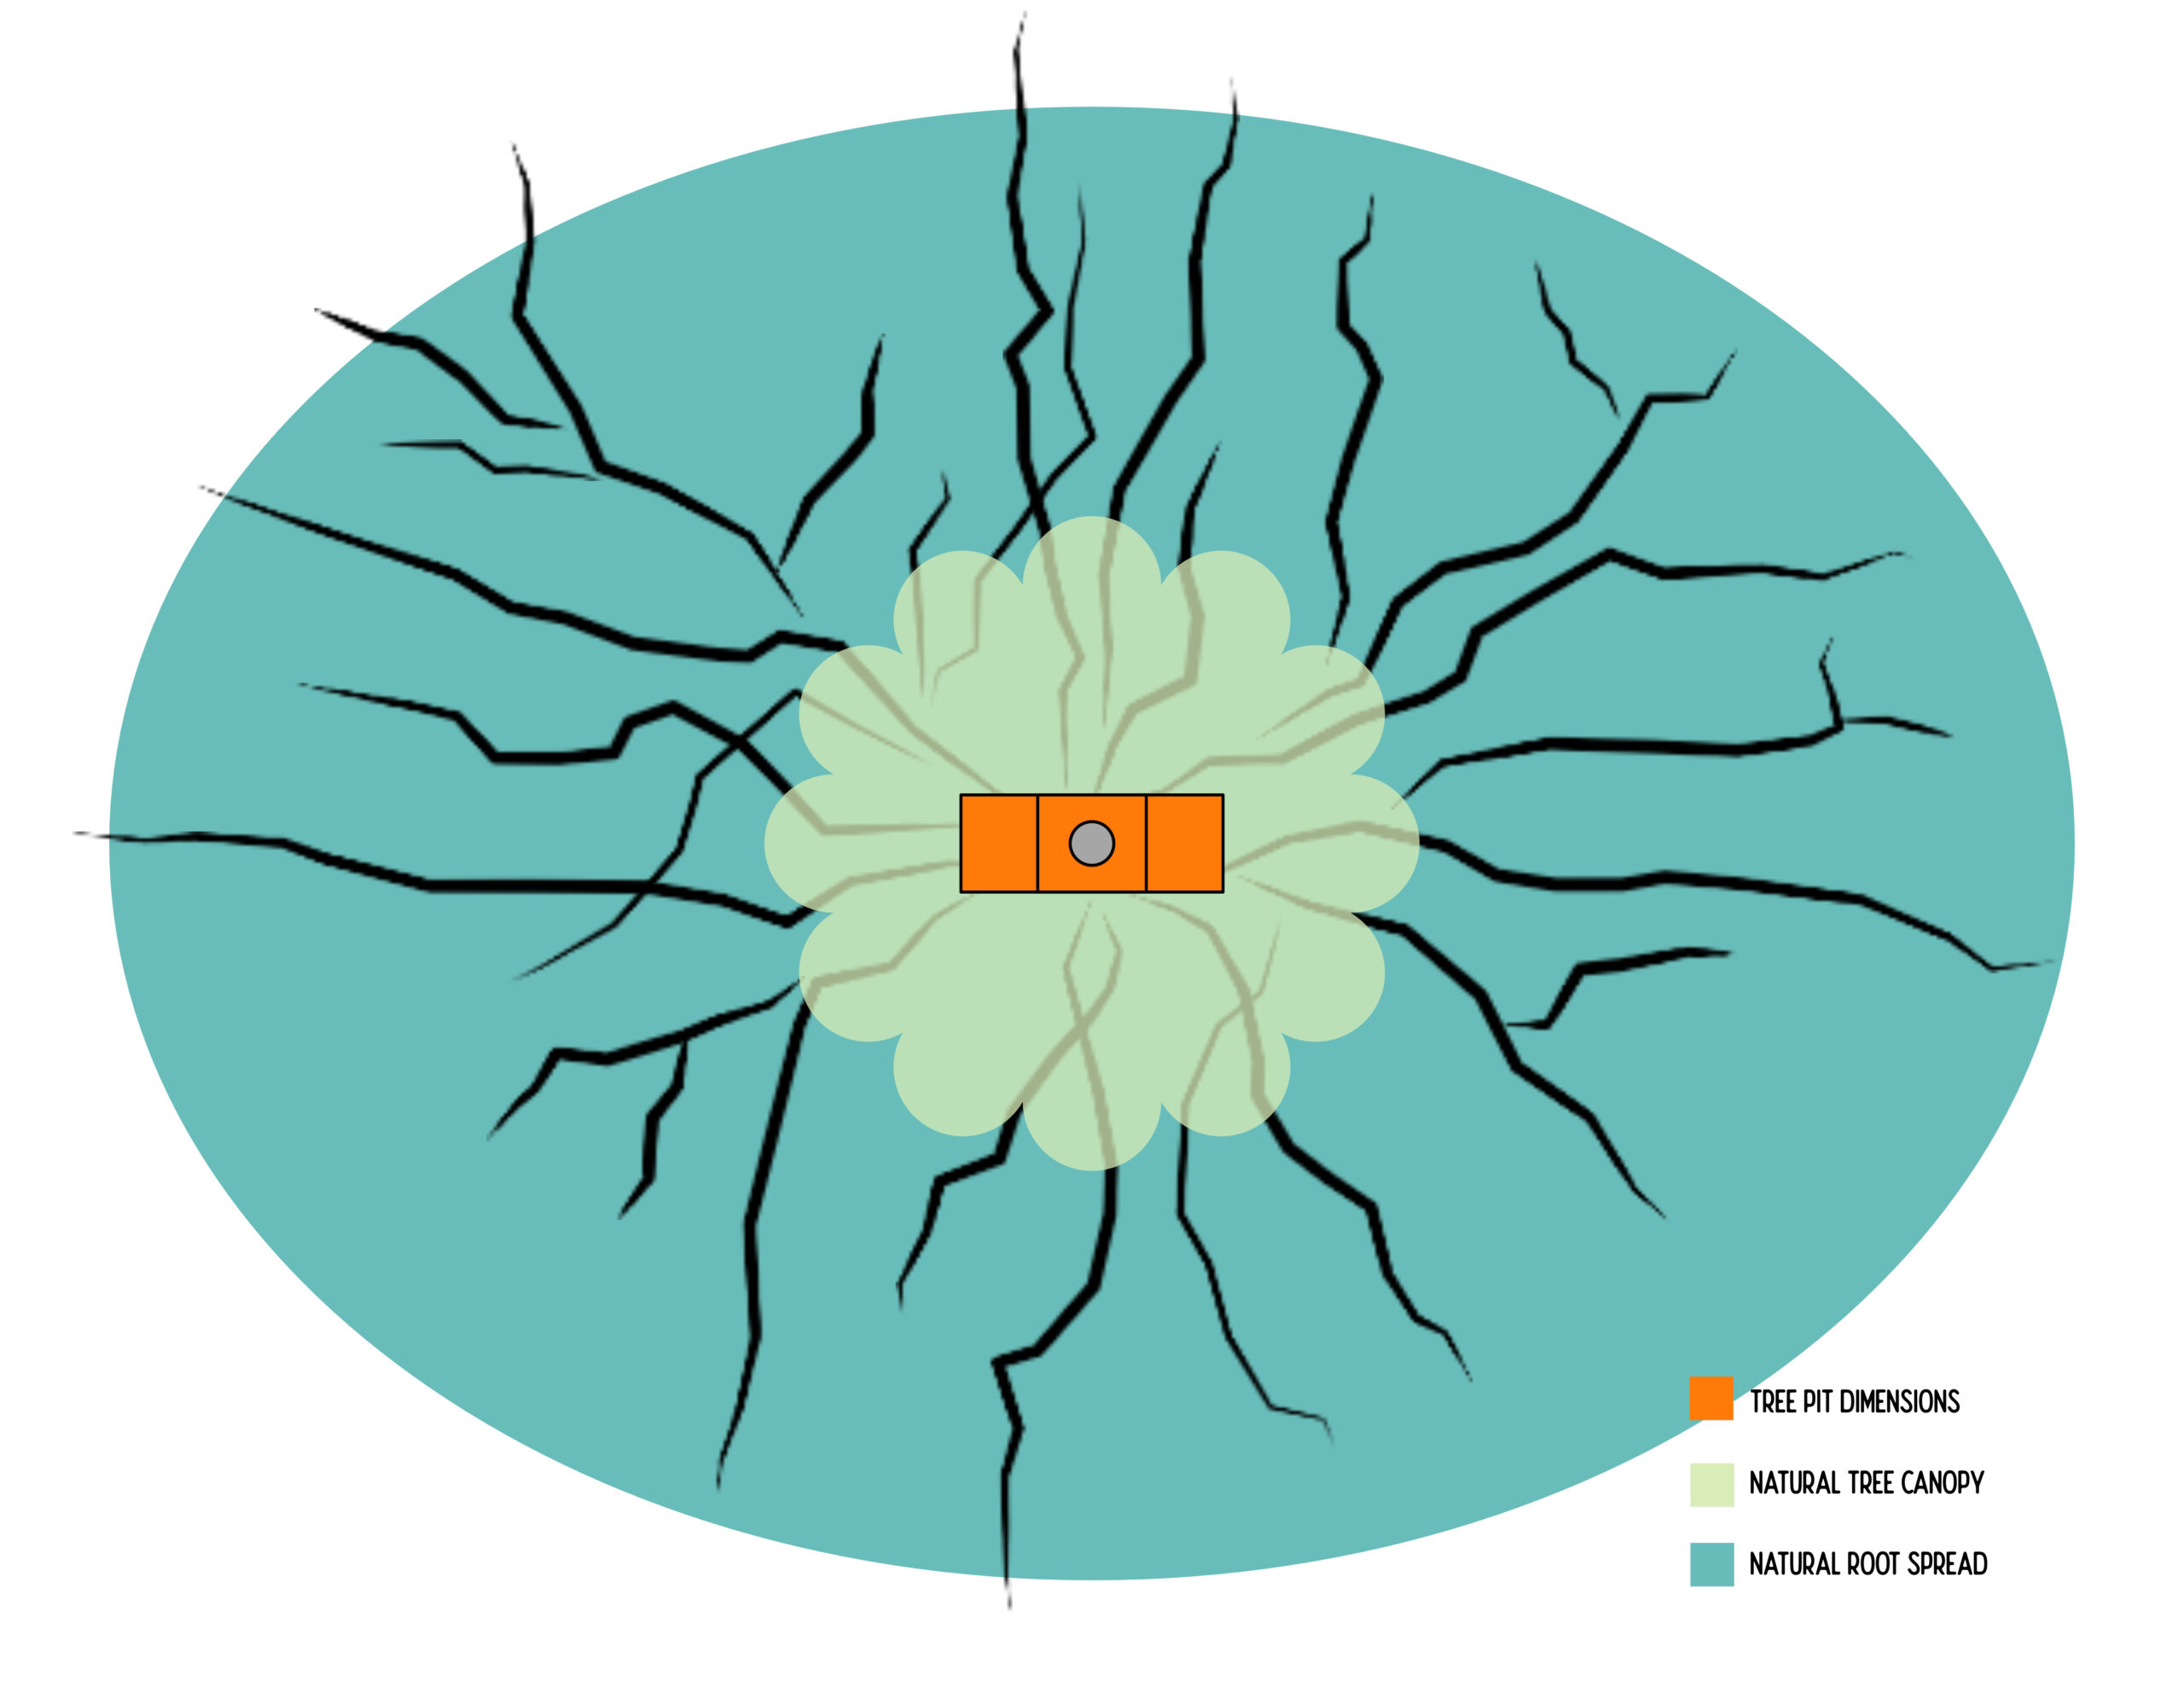 Standard tree pit dimensions vs natural canopy and root spread (Virens Studio, 2023)